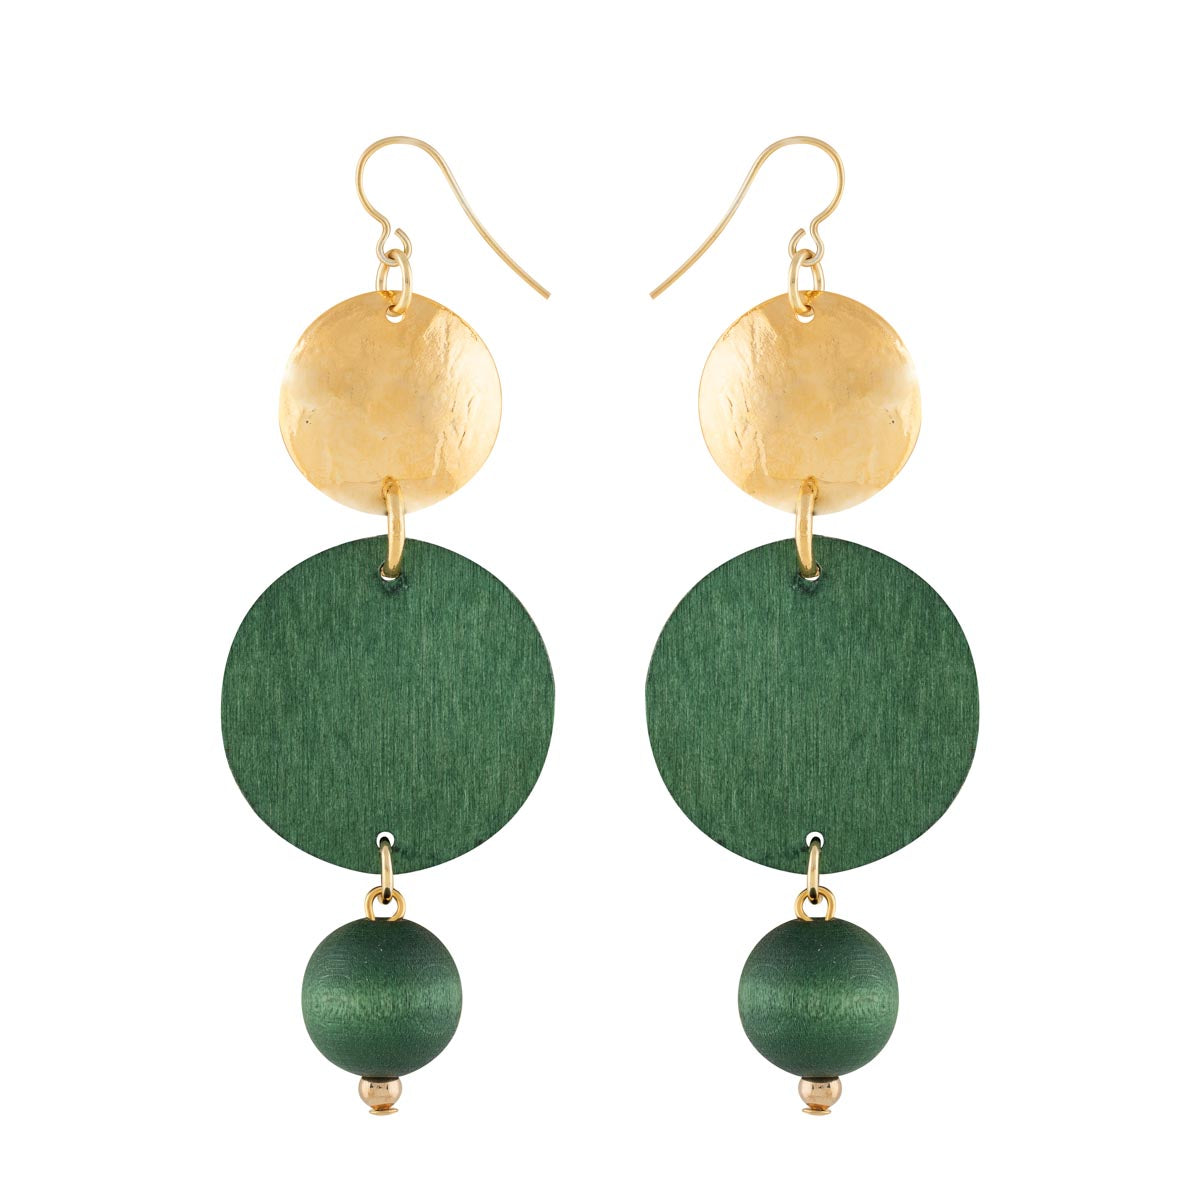 Ilta earrings, green and gold